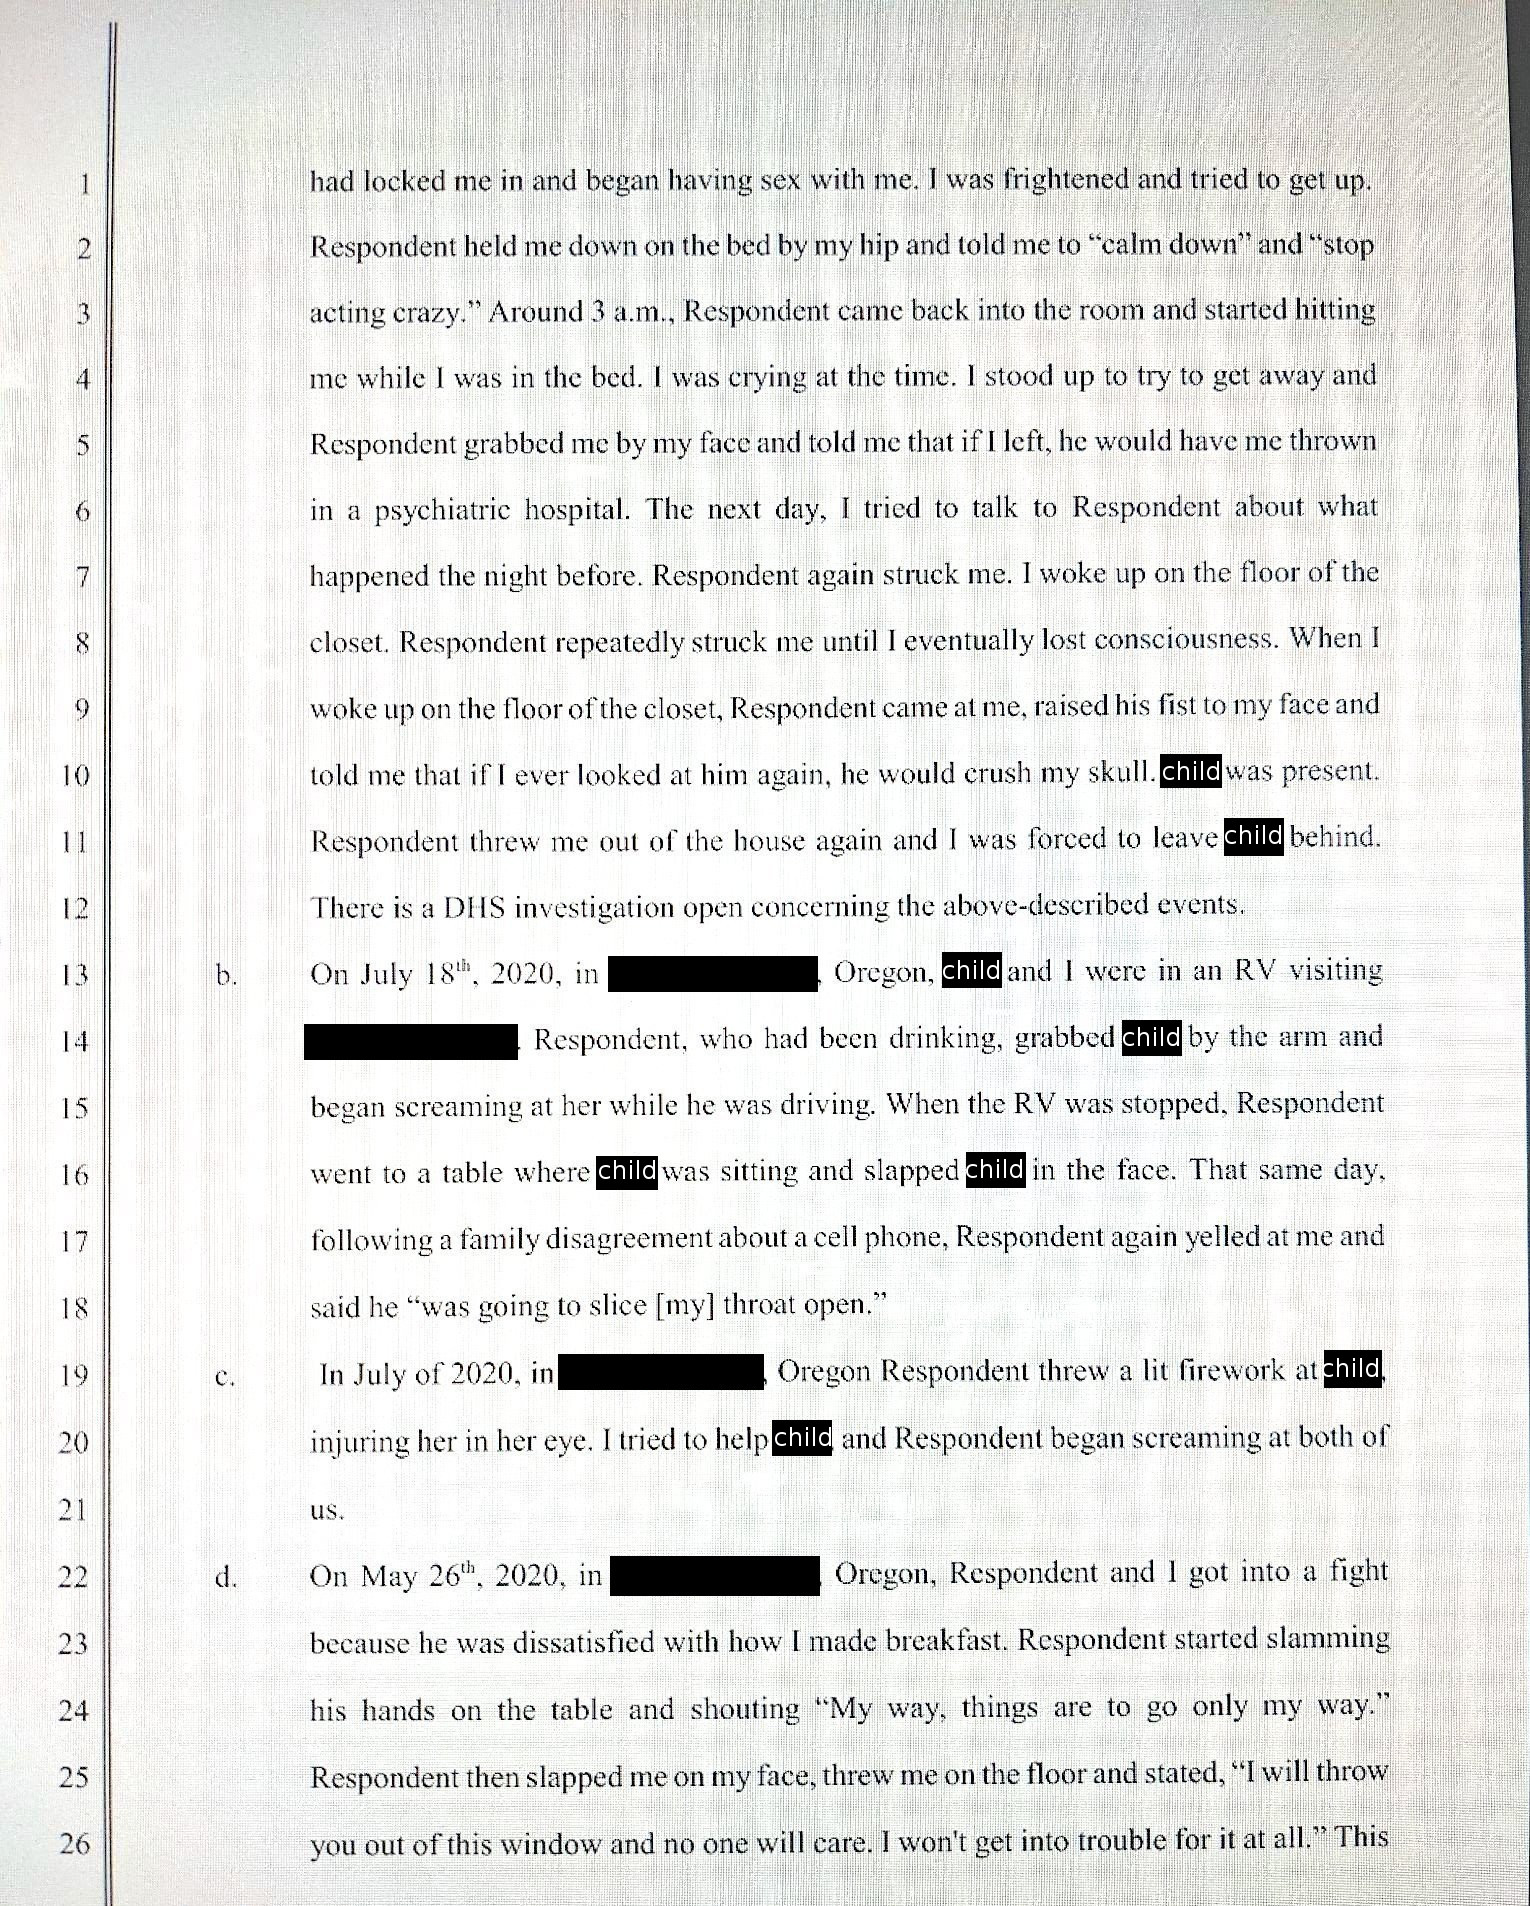 - IMAGE - Court document detailing Alexander Pappas' physical, sexual, and psychological abuse